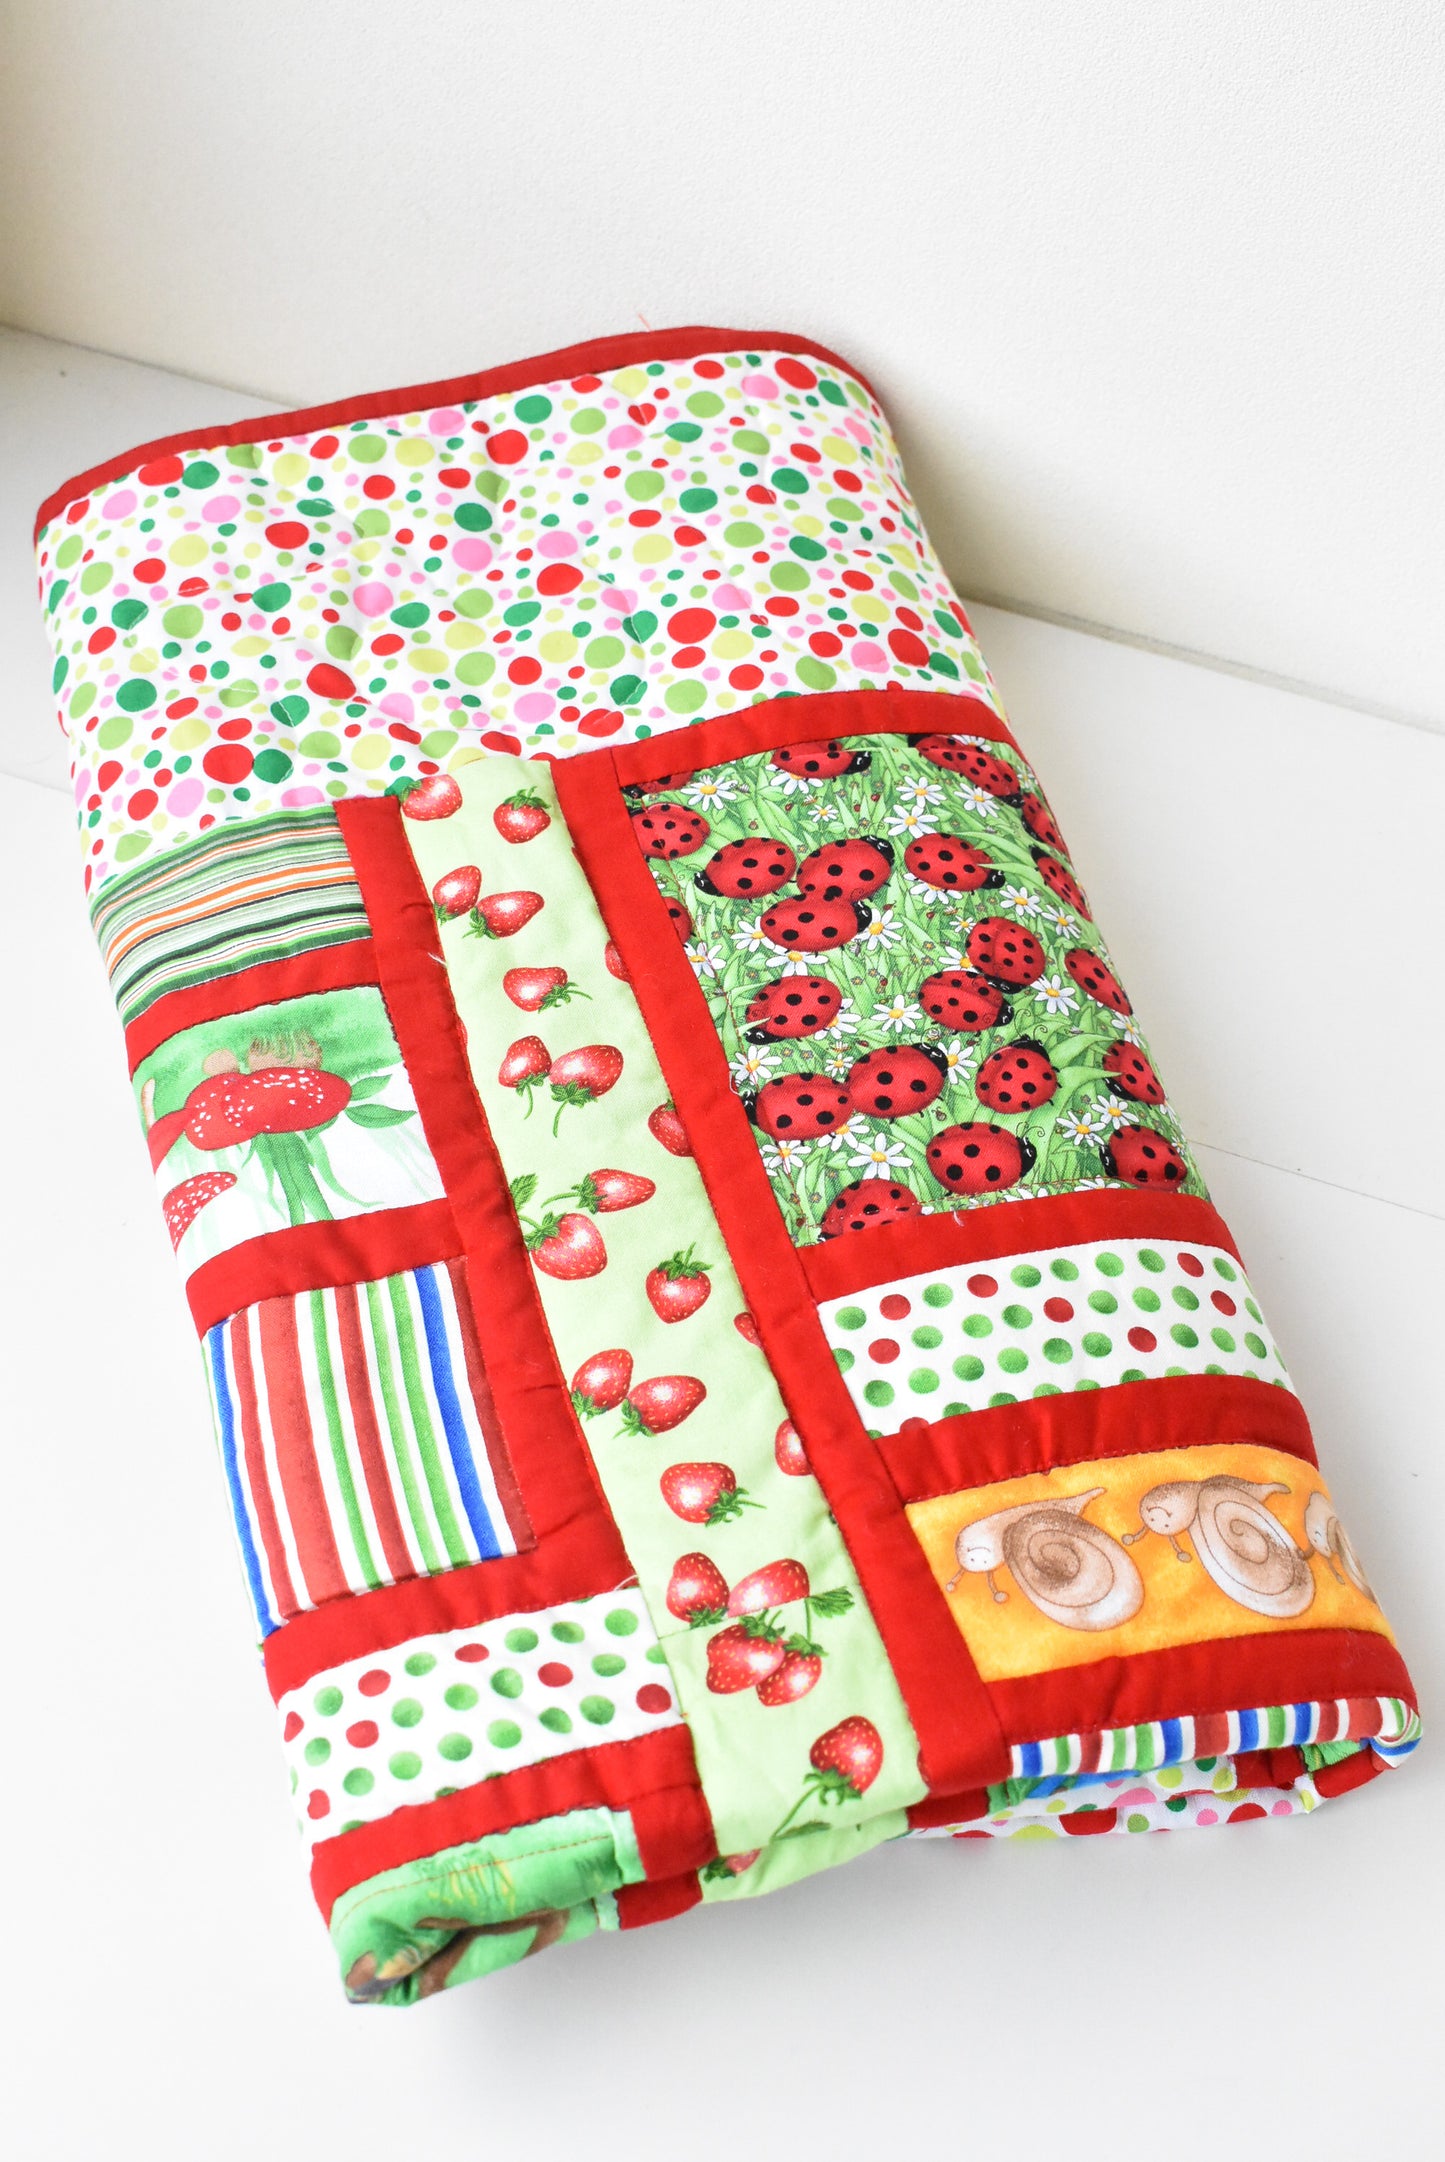 Patchwork quilt with gnomes